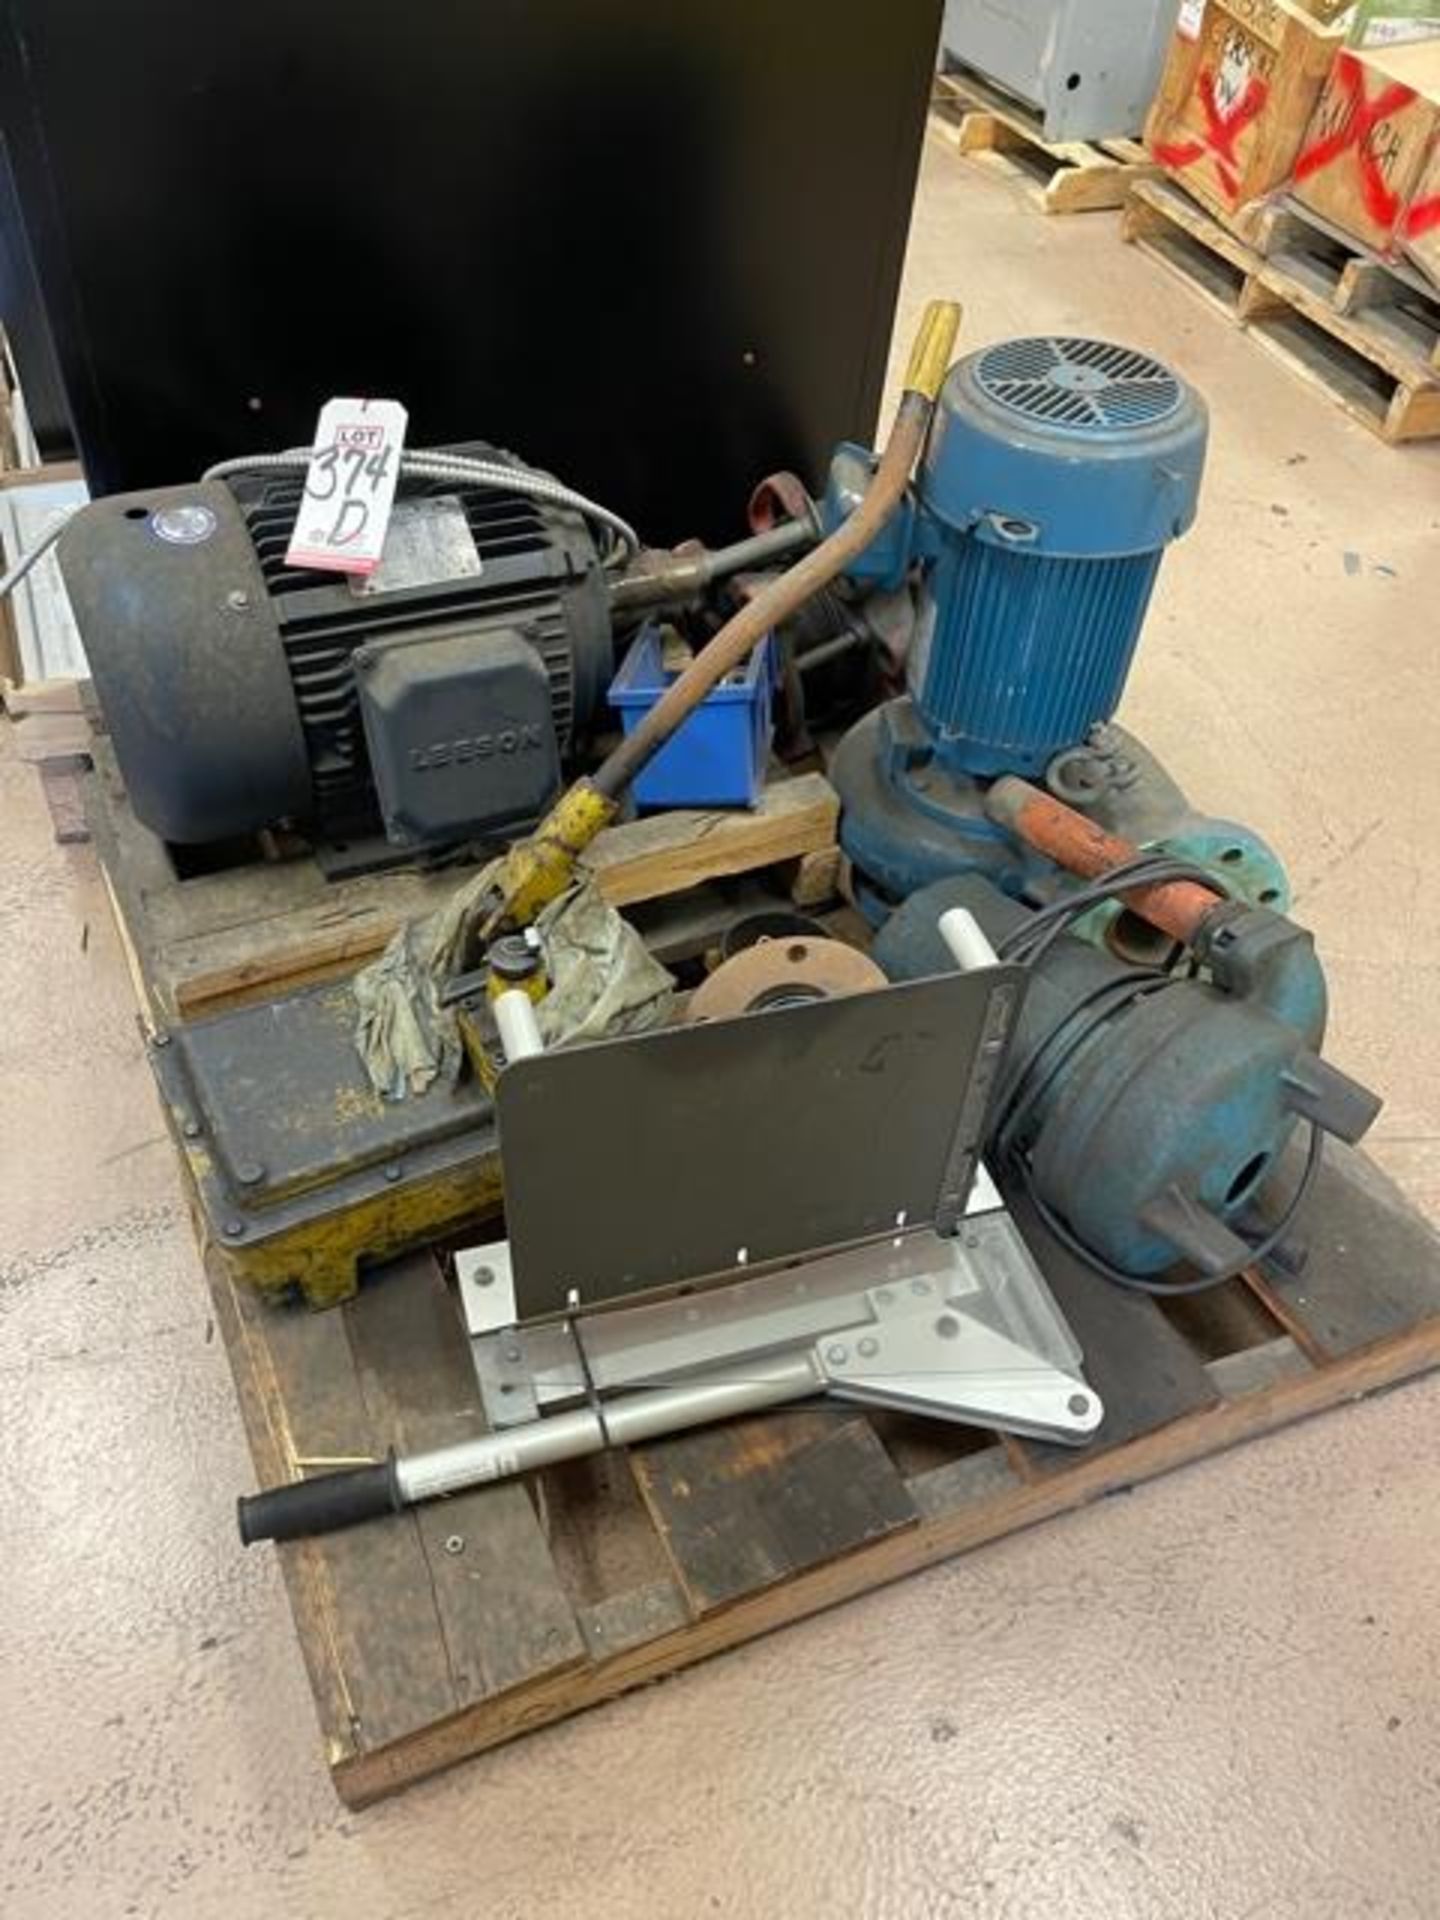 LOT - MIXED PALLET OF LEESON 15 HP ELECTRIC MOTOR, UNIMOUNT 125 ENCLOSED MOTOR, LARGE THREADING DIE,